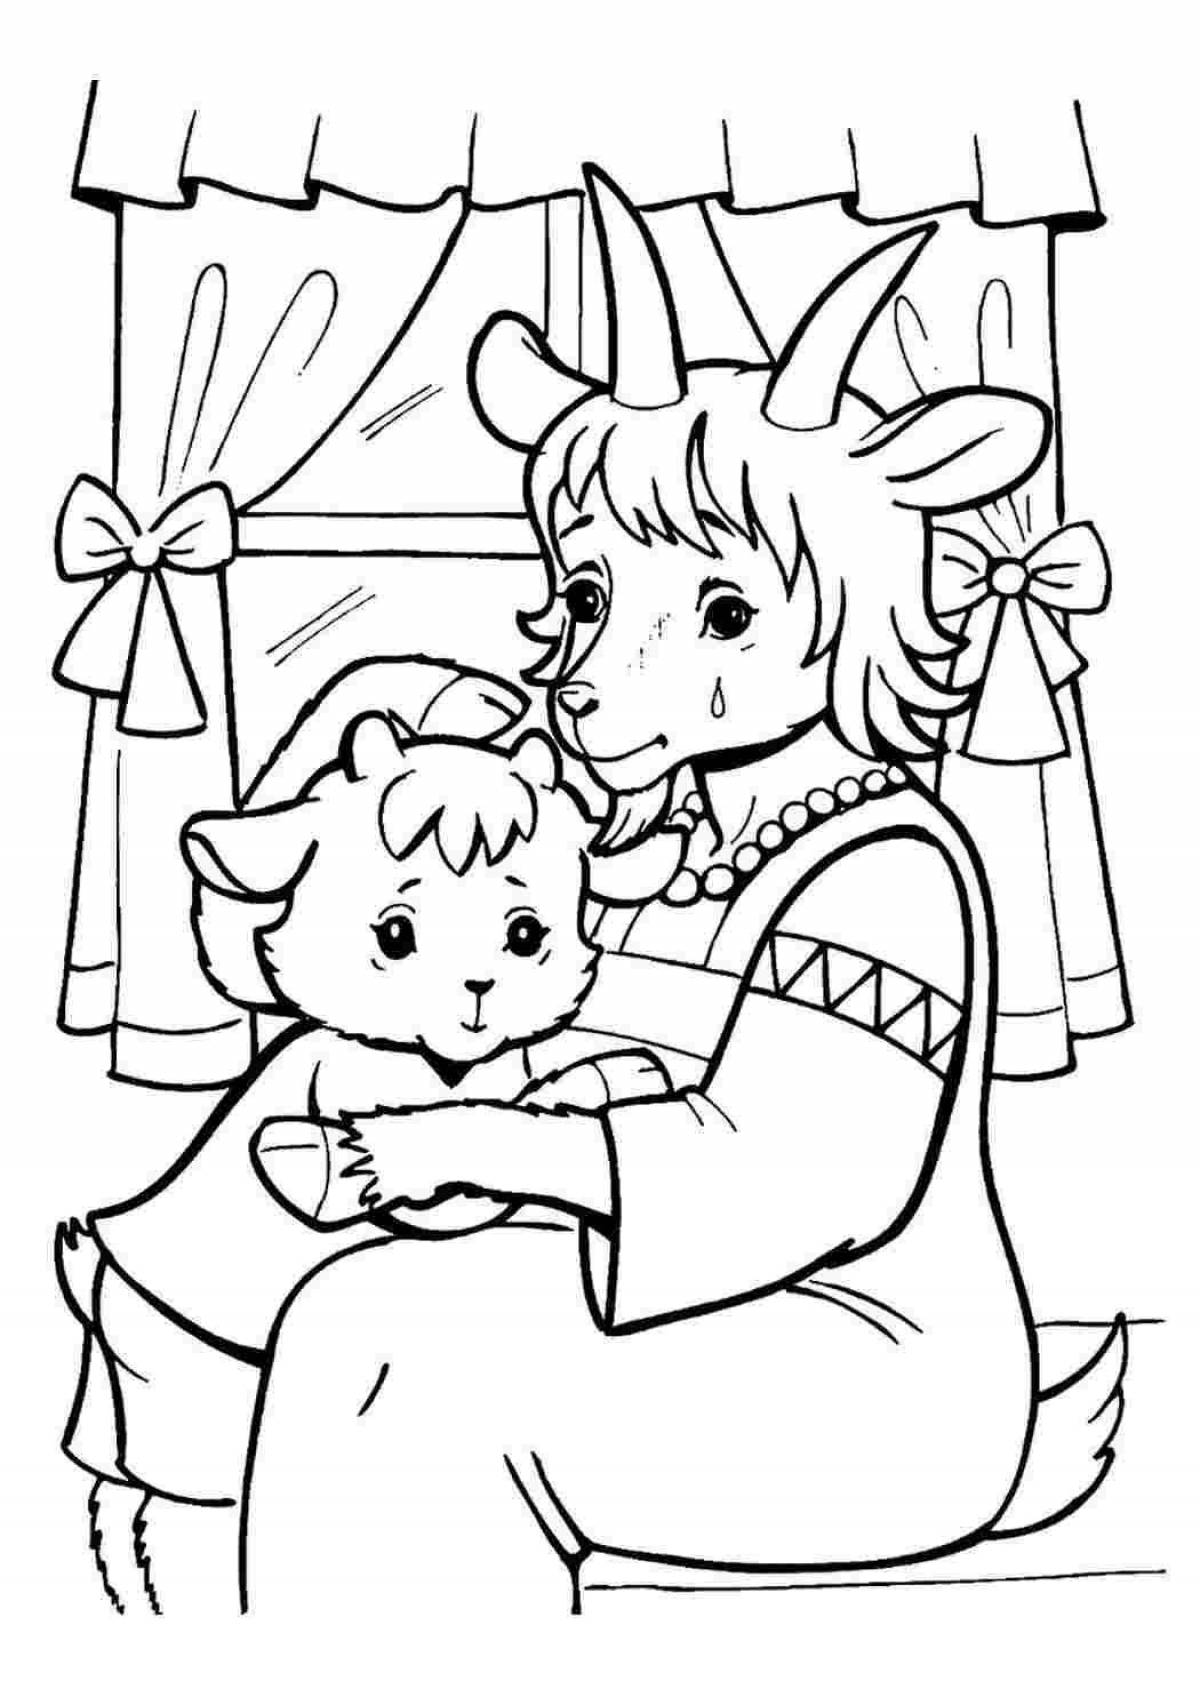 Coloring book glowing goat and seven children